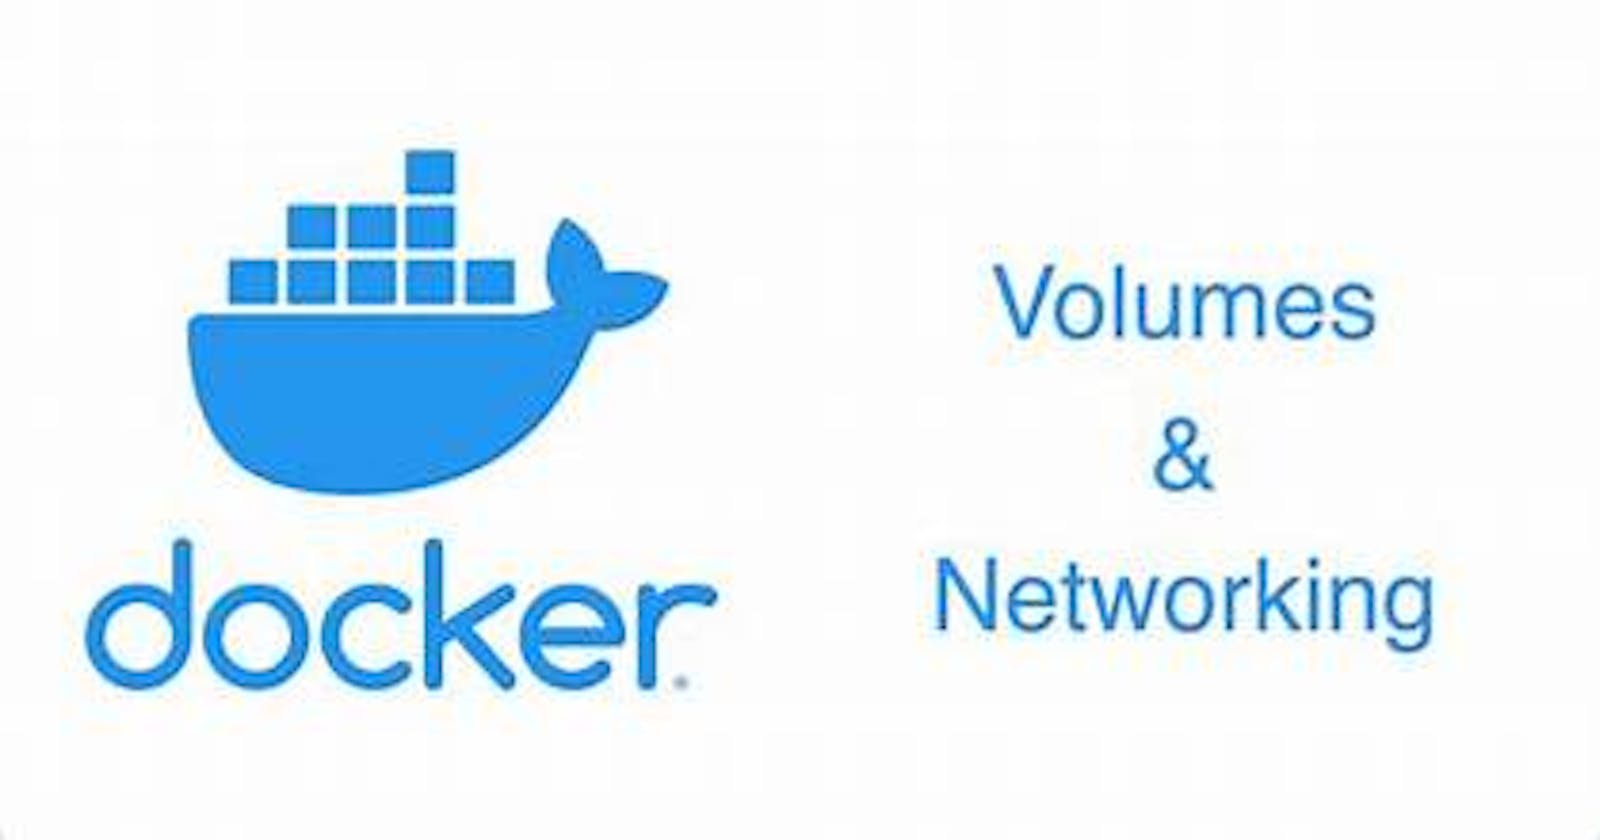 Day 19 Task: Exploring Docker Volume and Network Concepts